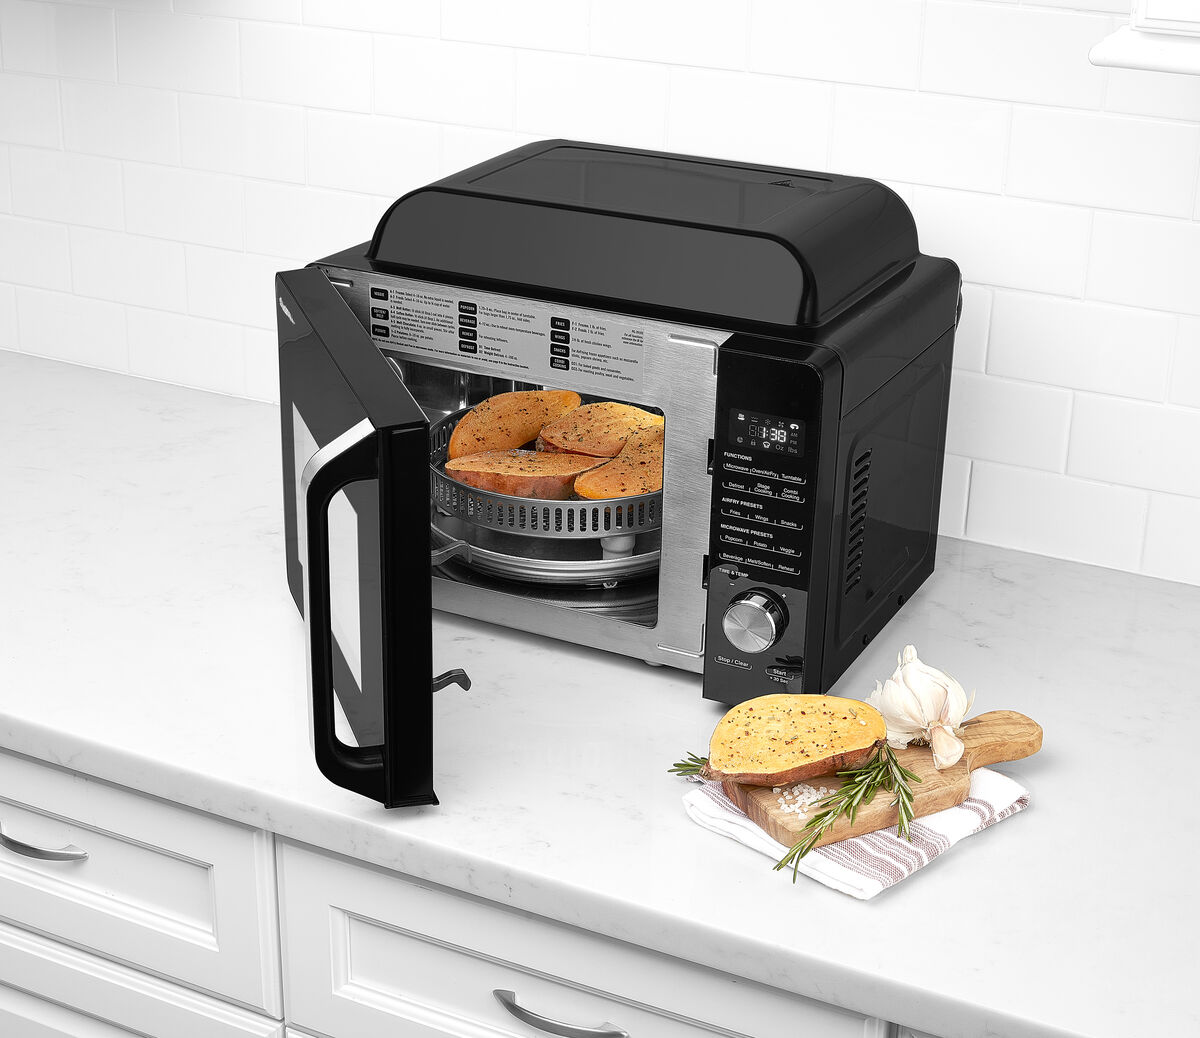 Discontinued Cuisinart 3-in-1 Microwave Air Fryer Oven